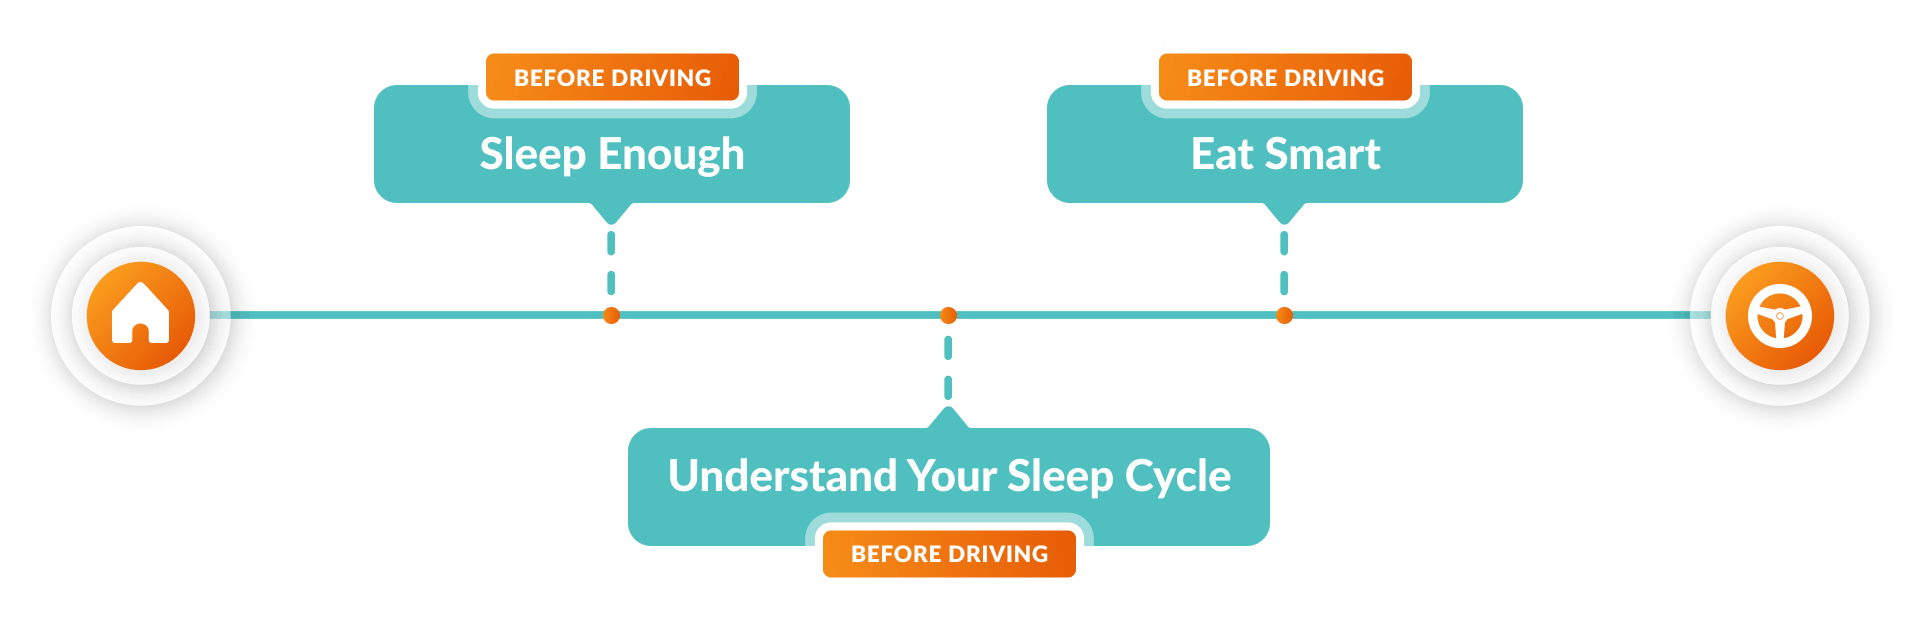 prevent drowsy driving